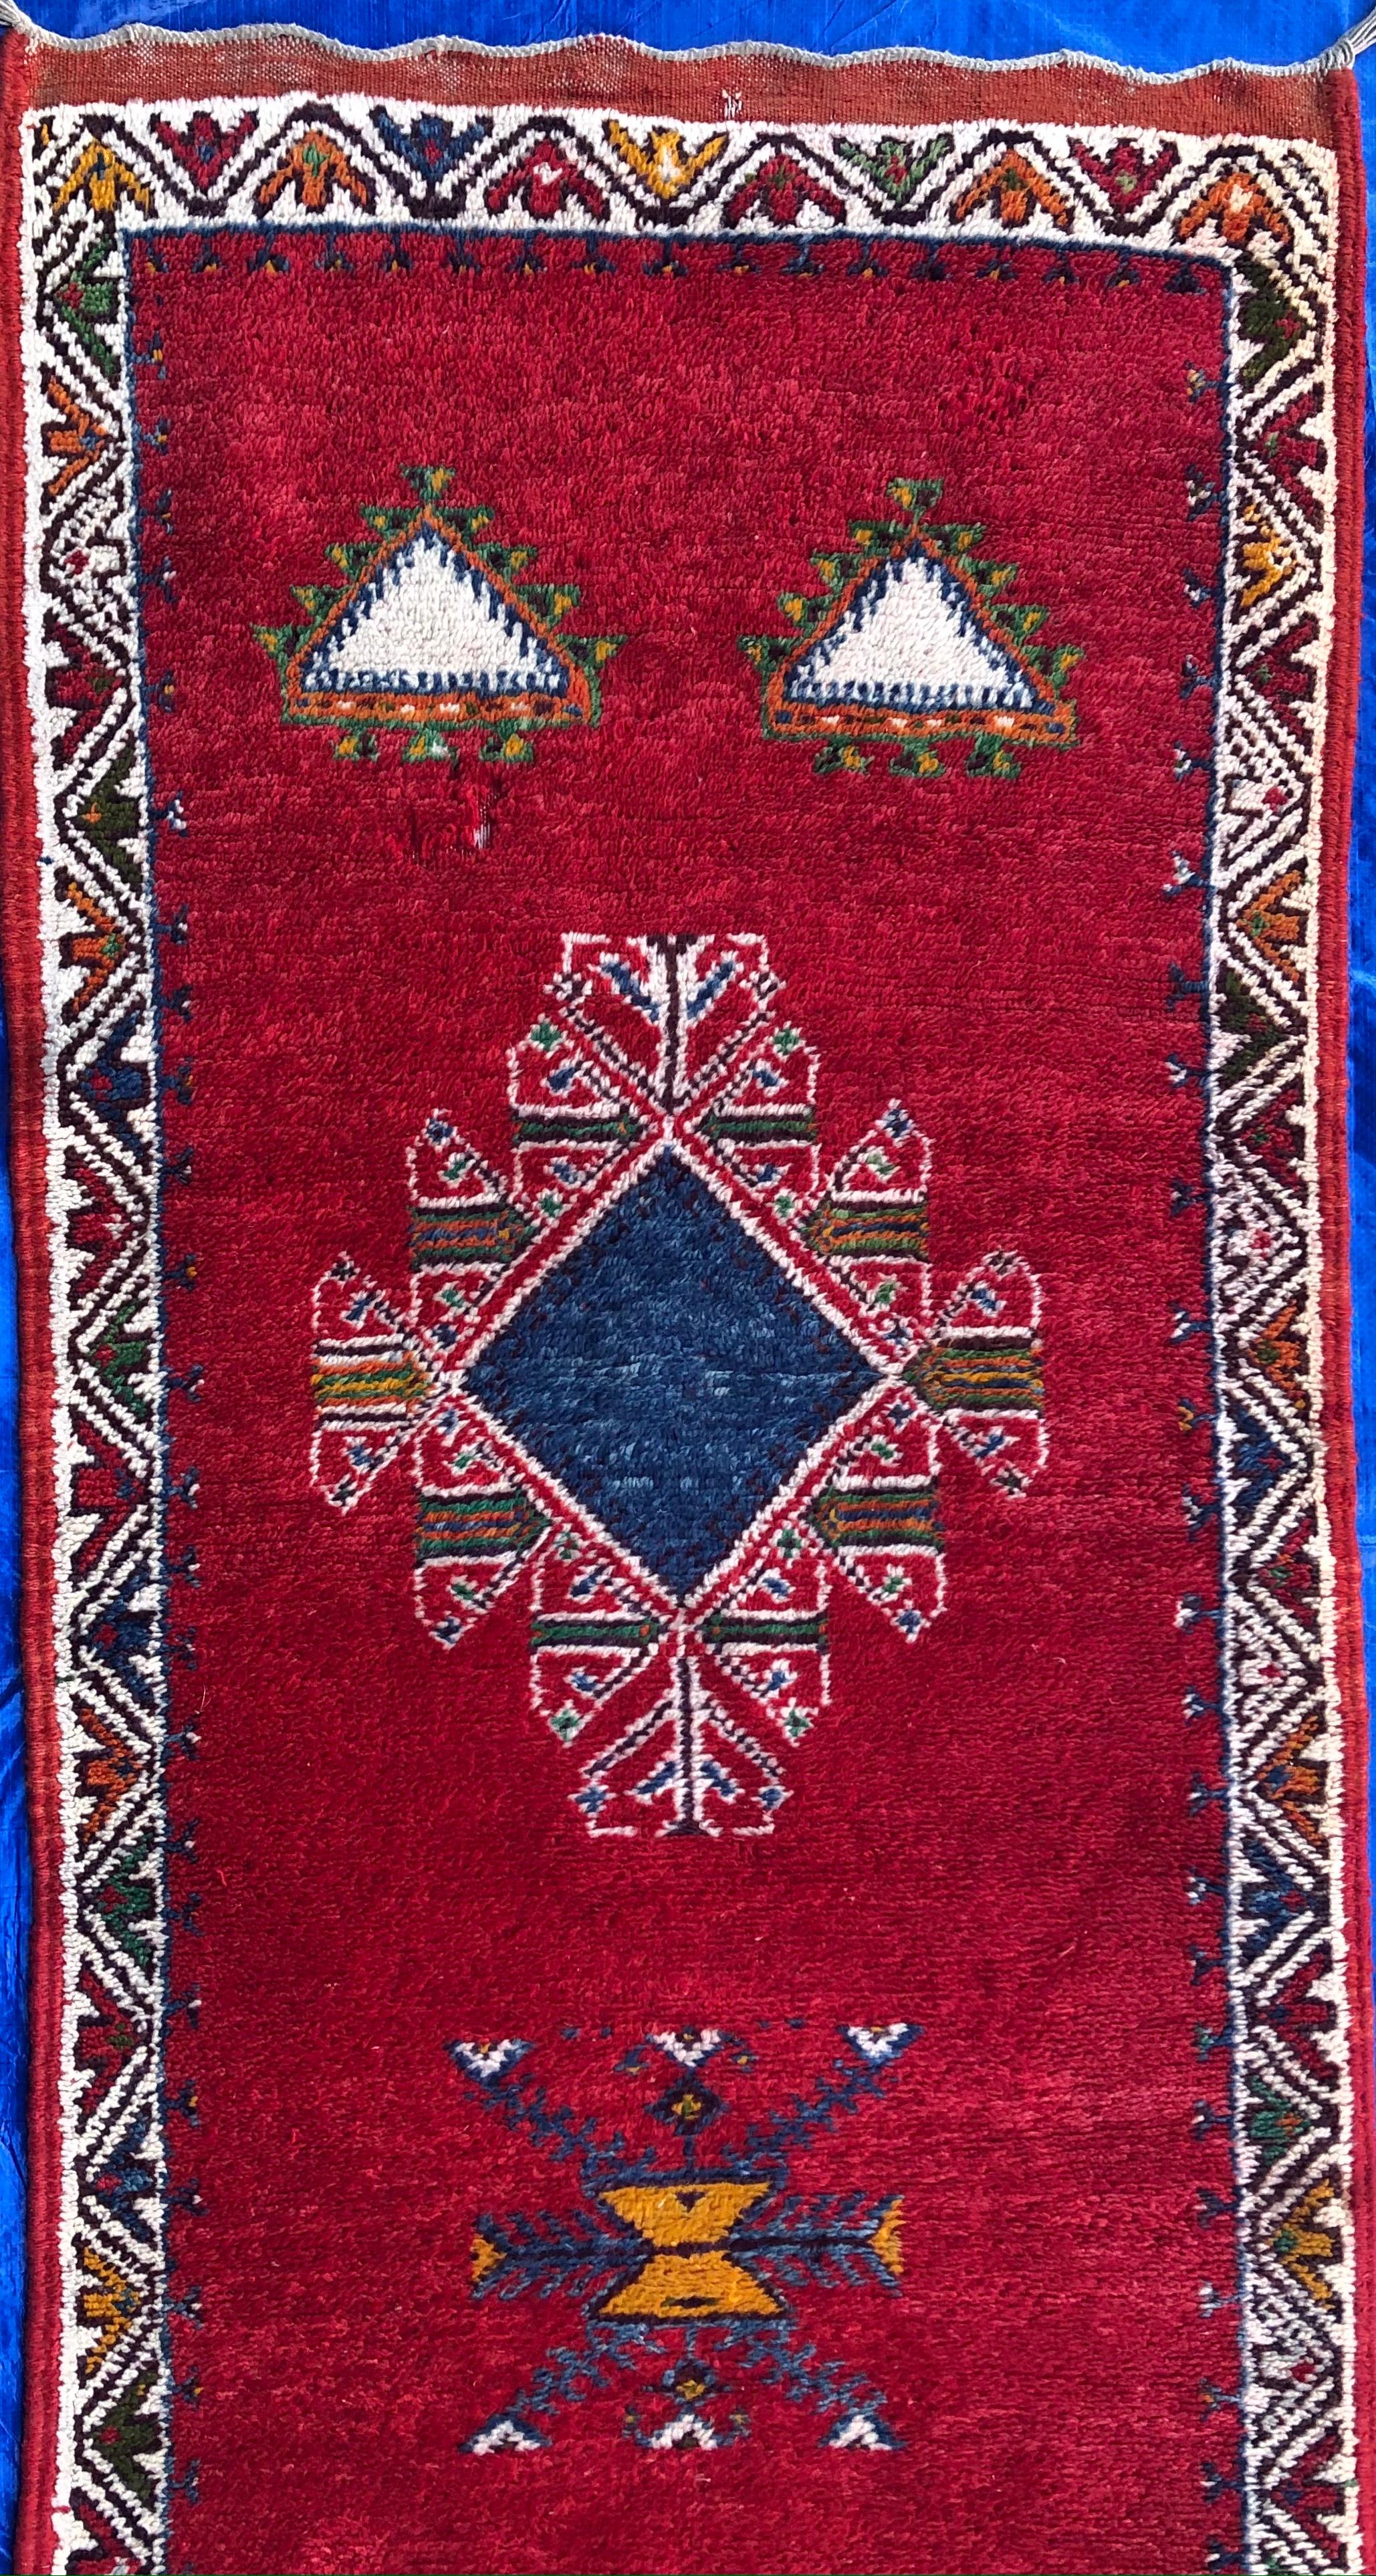 Vintage Moroccan Tribal Rug or Runner Vibrant Red and Accentuating Blue & White In Good Condition For Sale In Miami, FL